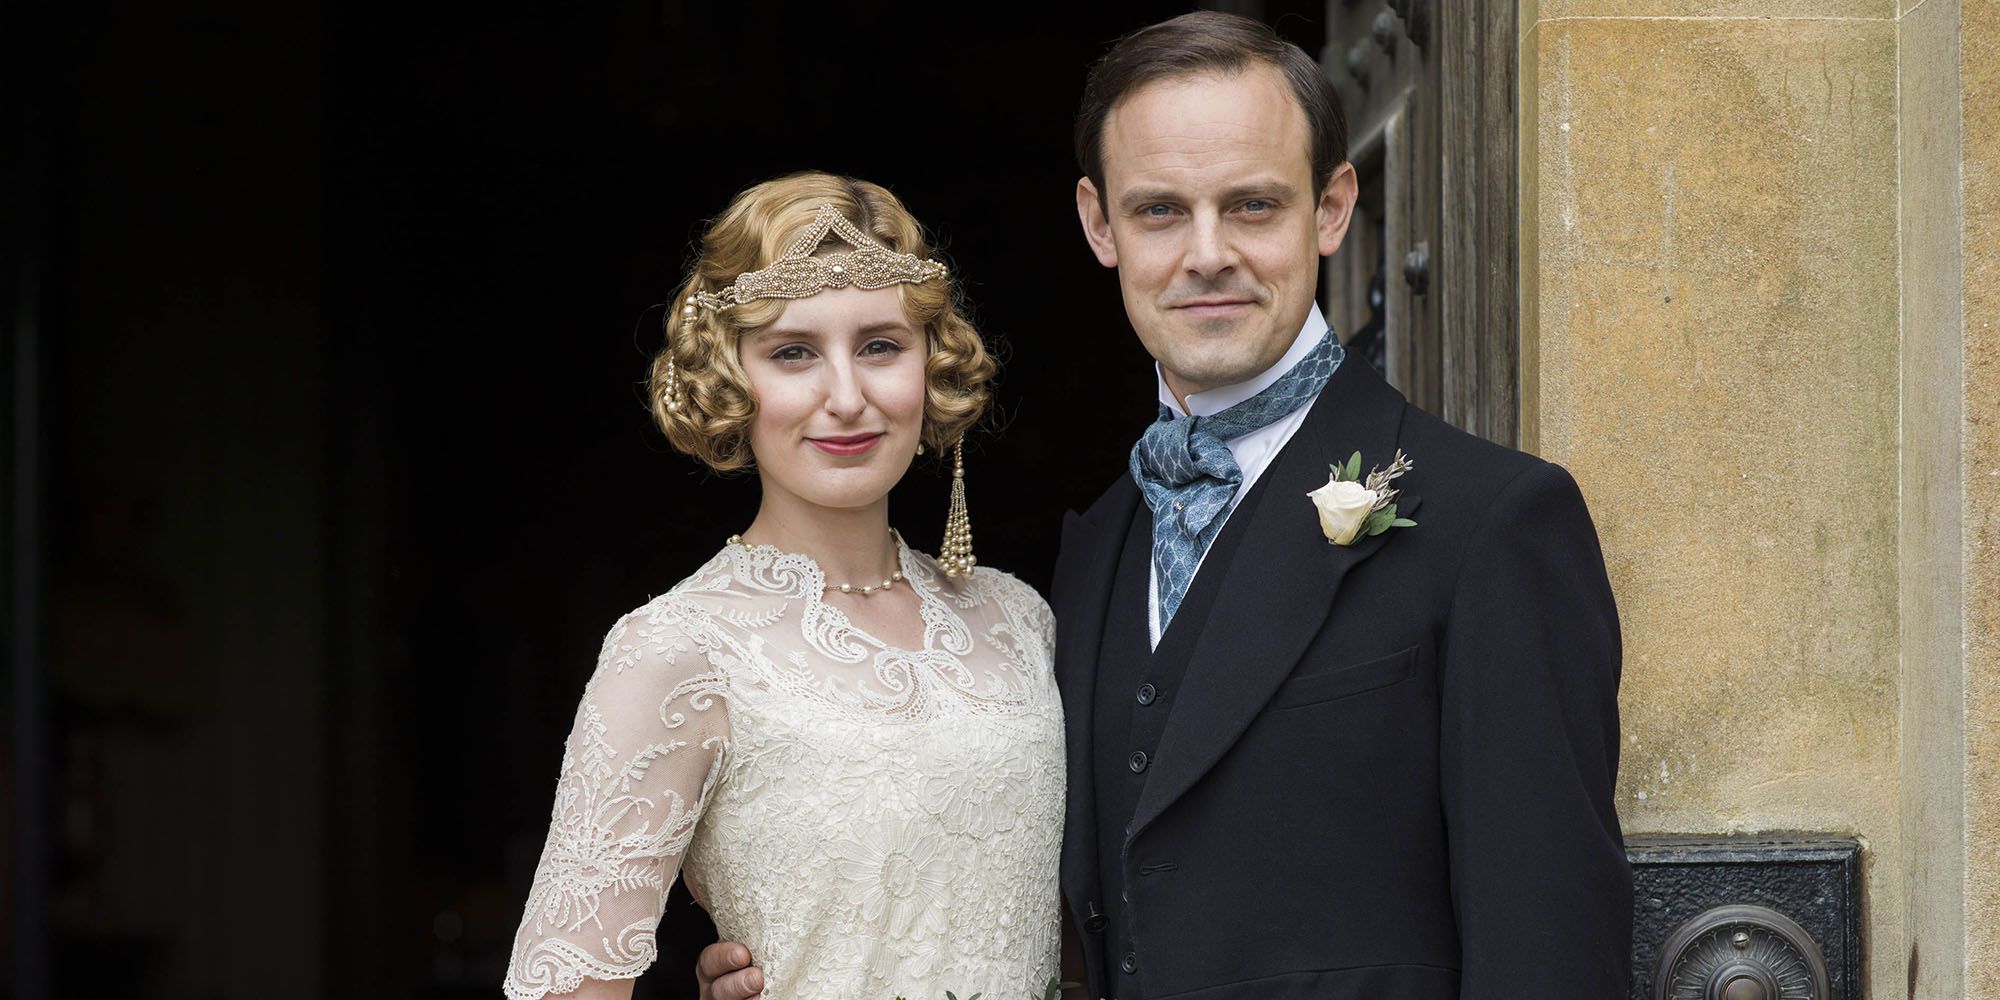 Edith poses with Bertie Downton Abbey